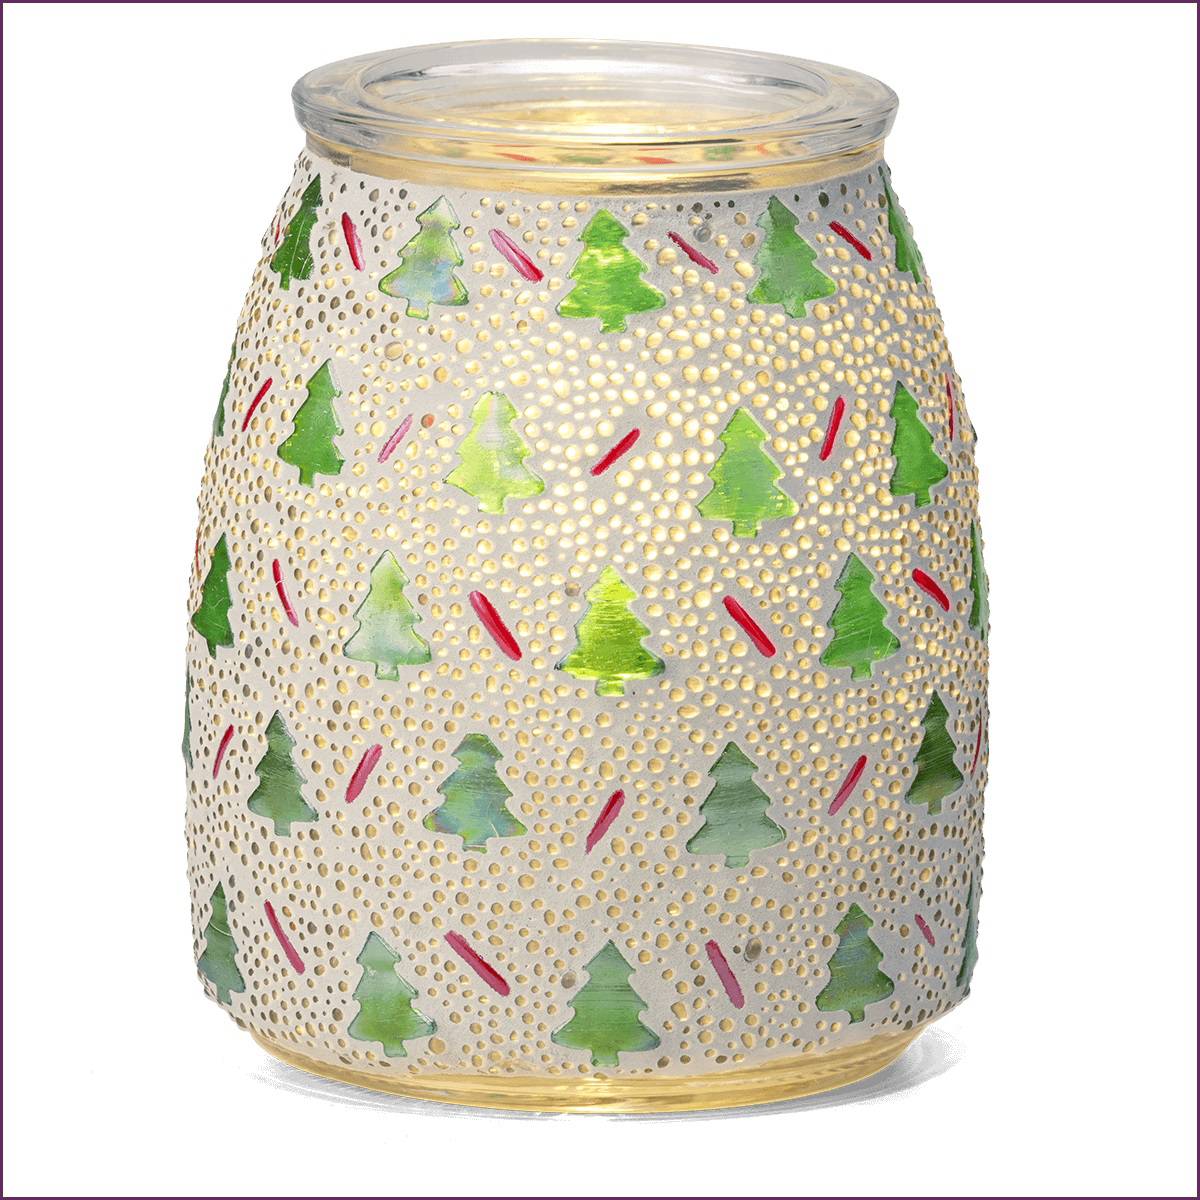 Merry Mosaic Scentsy Warmer | Stock On